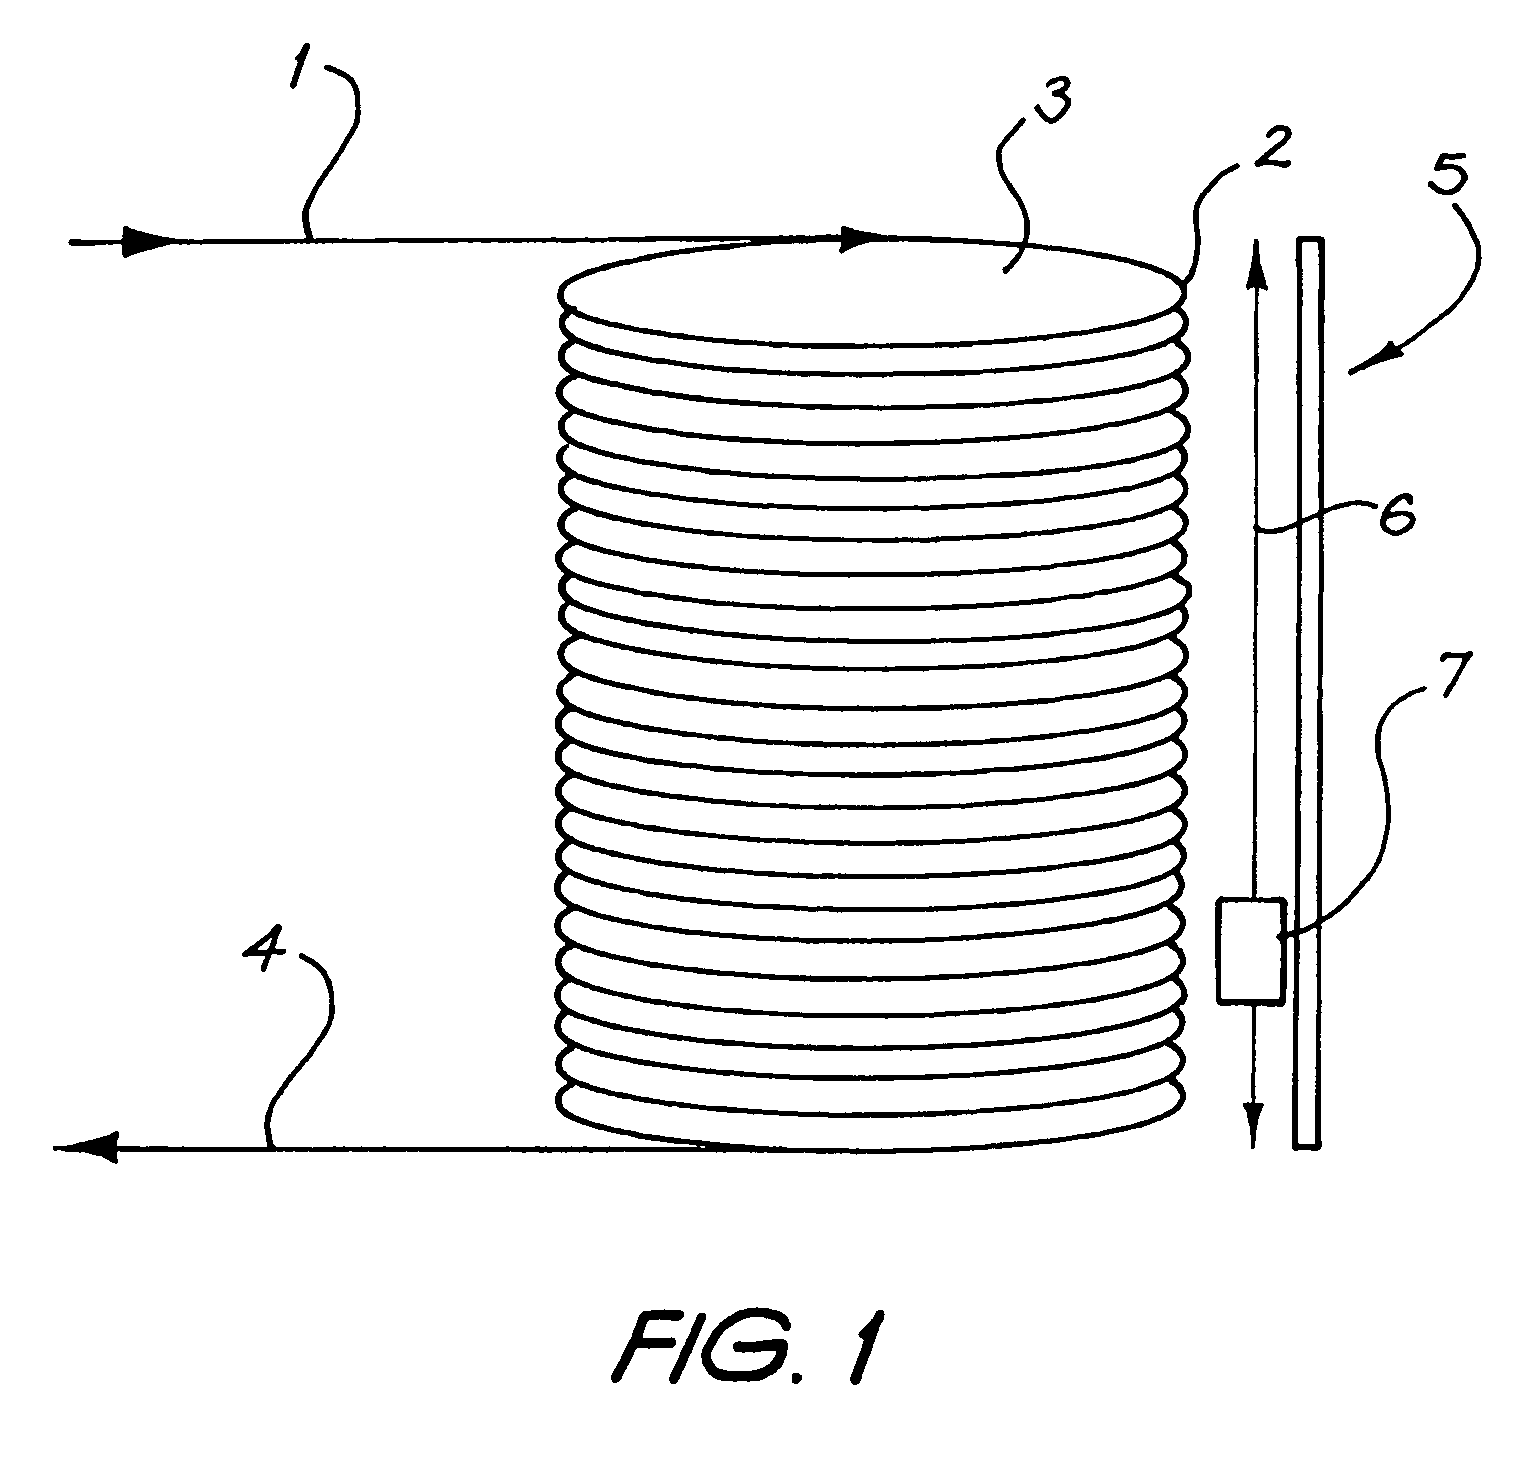 Continuous flow thermal device